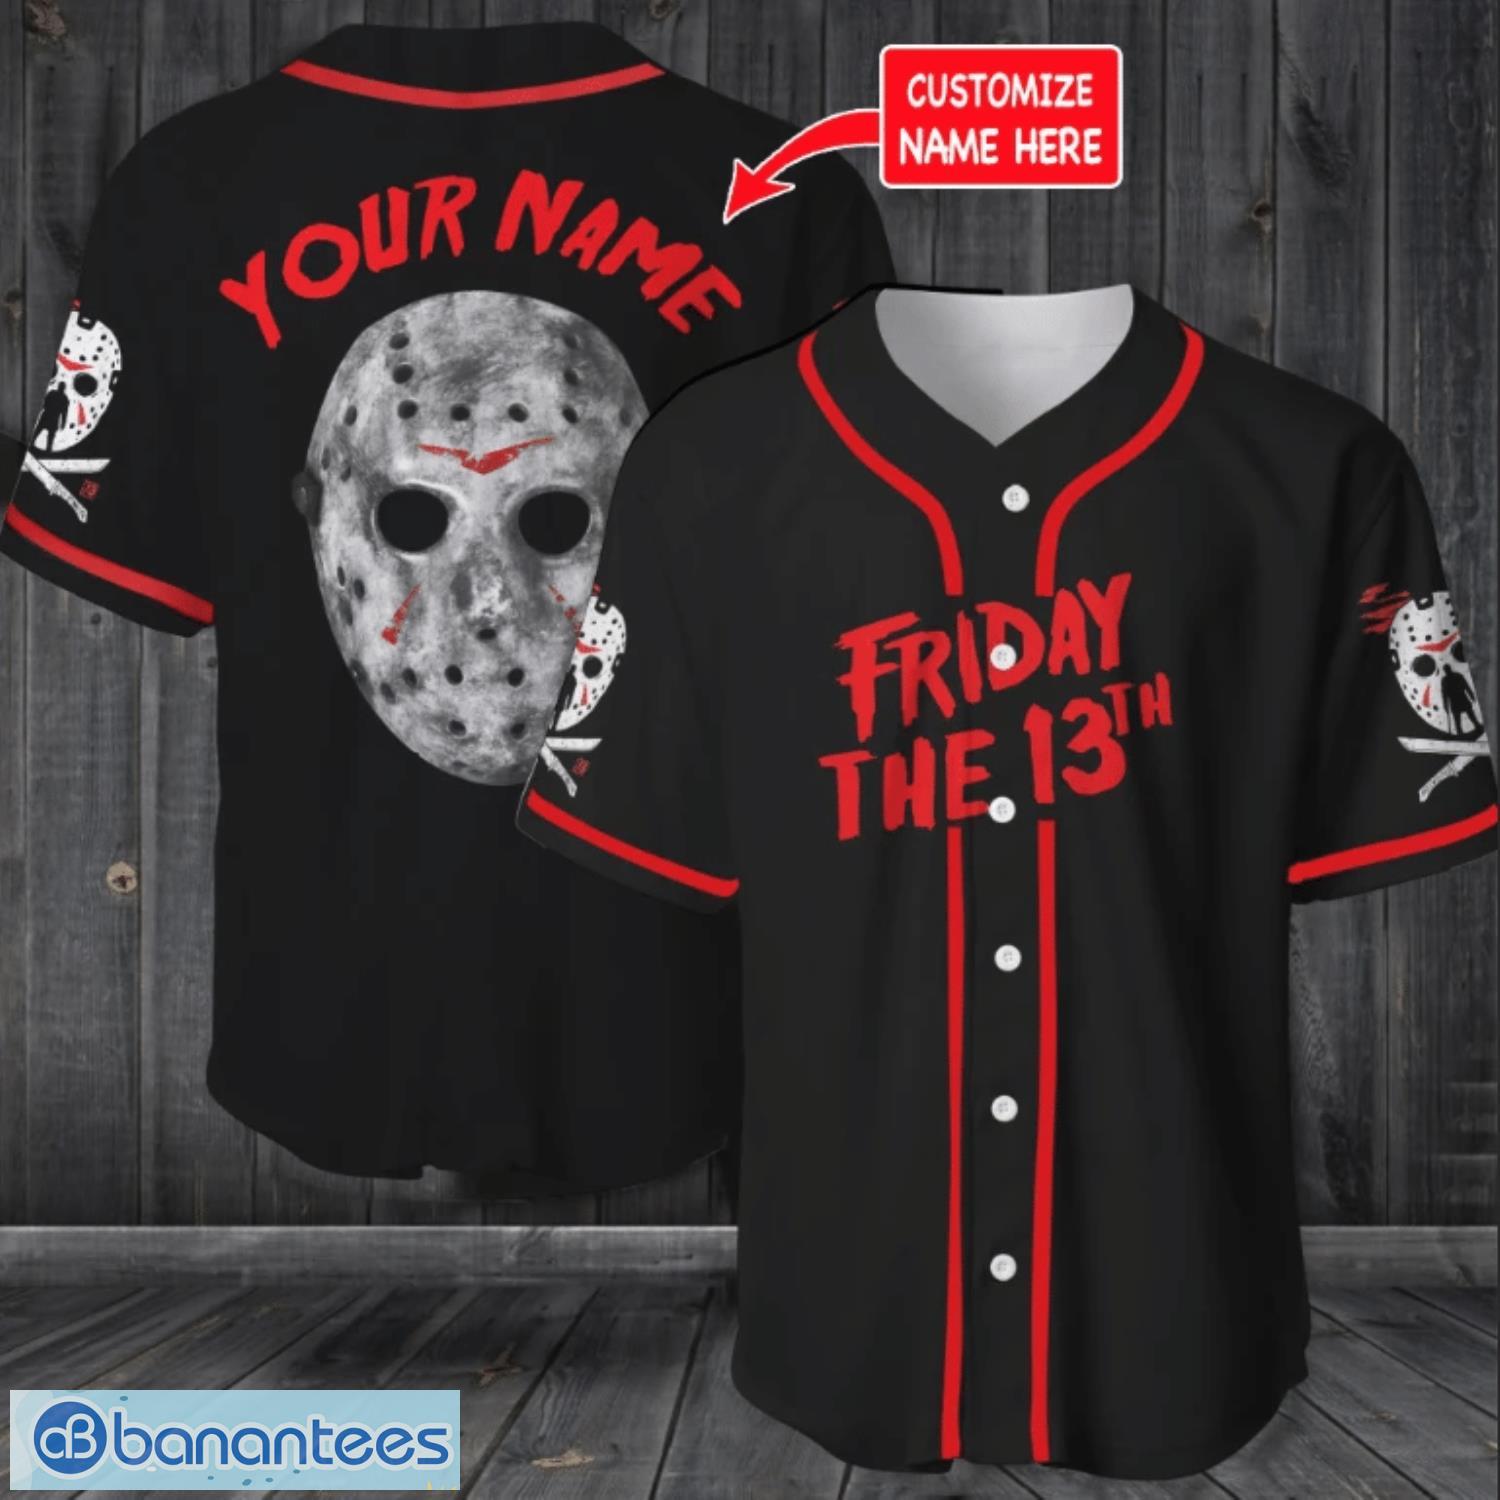 CUSTOM T-Shirt JERSEY Personalized Name Number Team - Scared